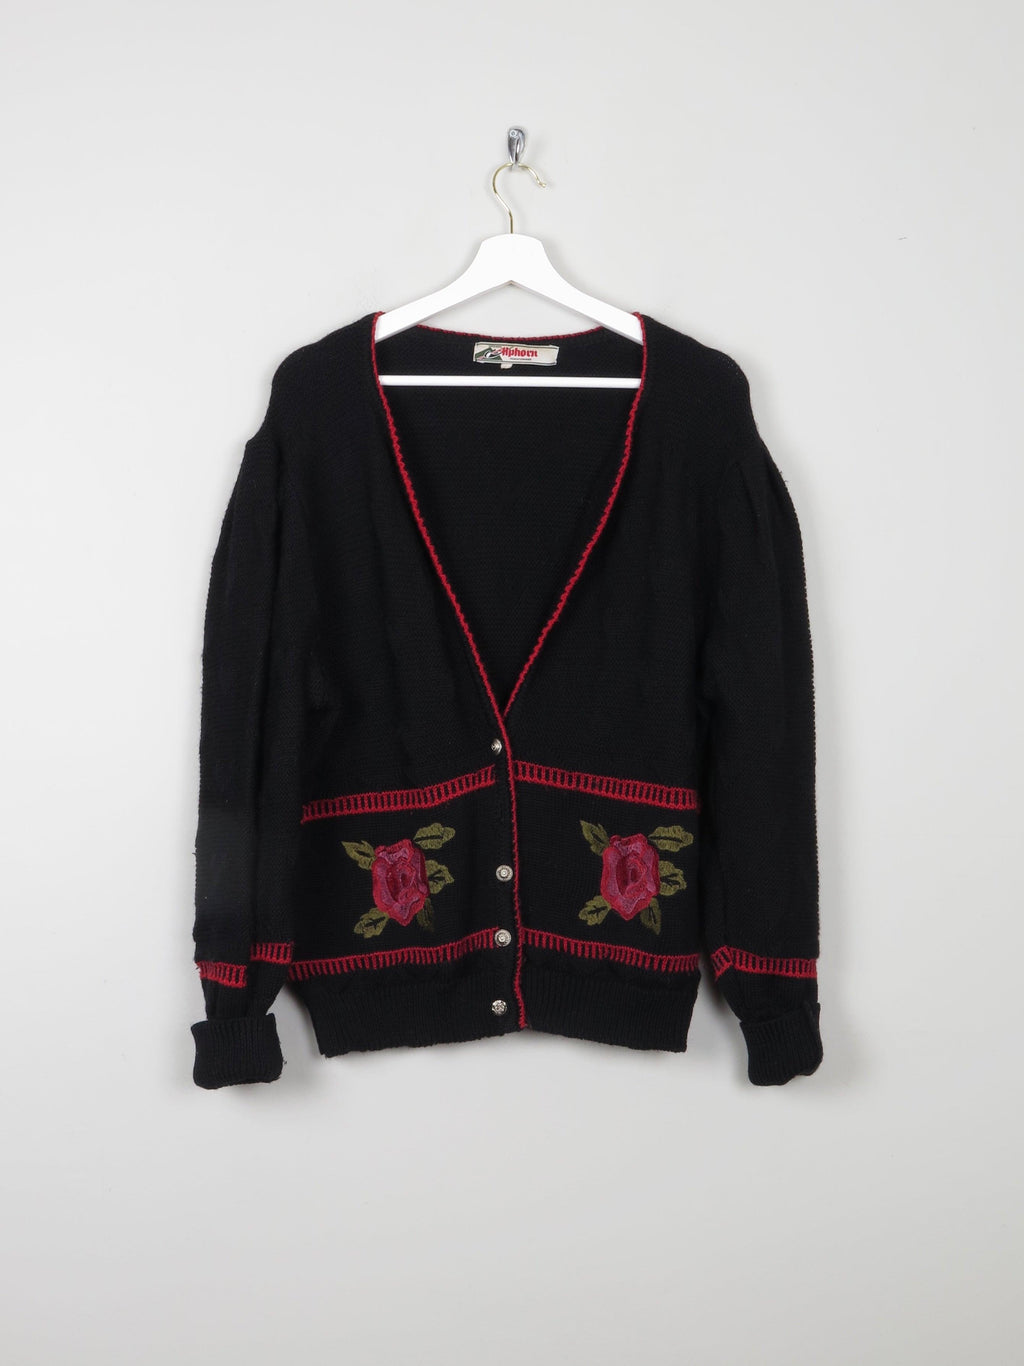 Women's Navy Austrian Cardigan With Floral Motifs L/XL - The Harlequin